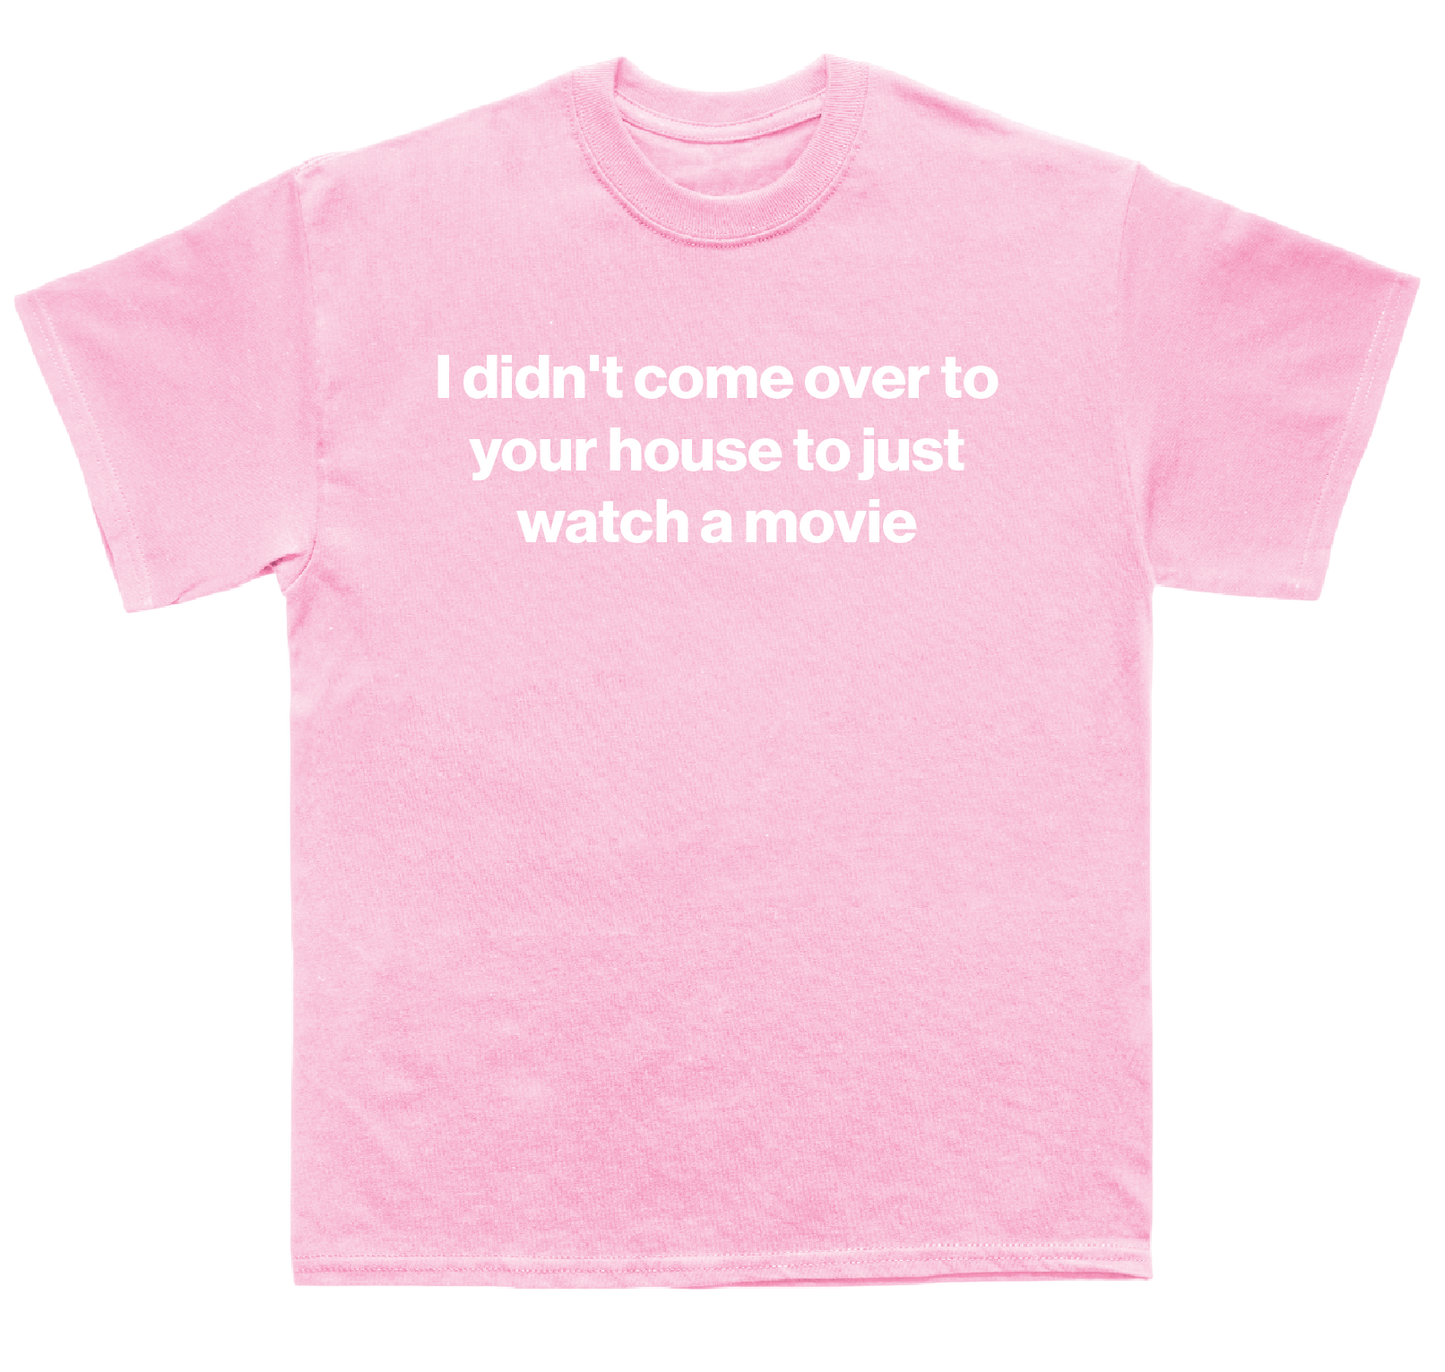 I didn't come over to your house to just watch a movie shirt